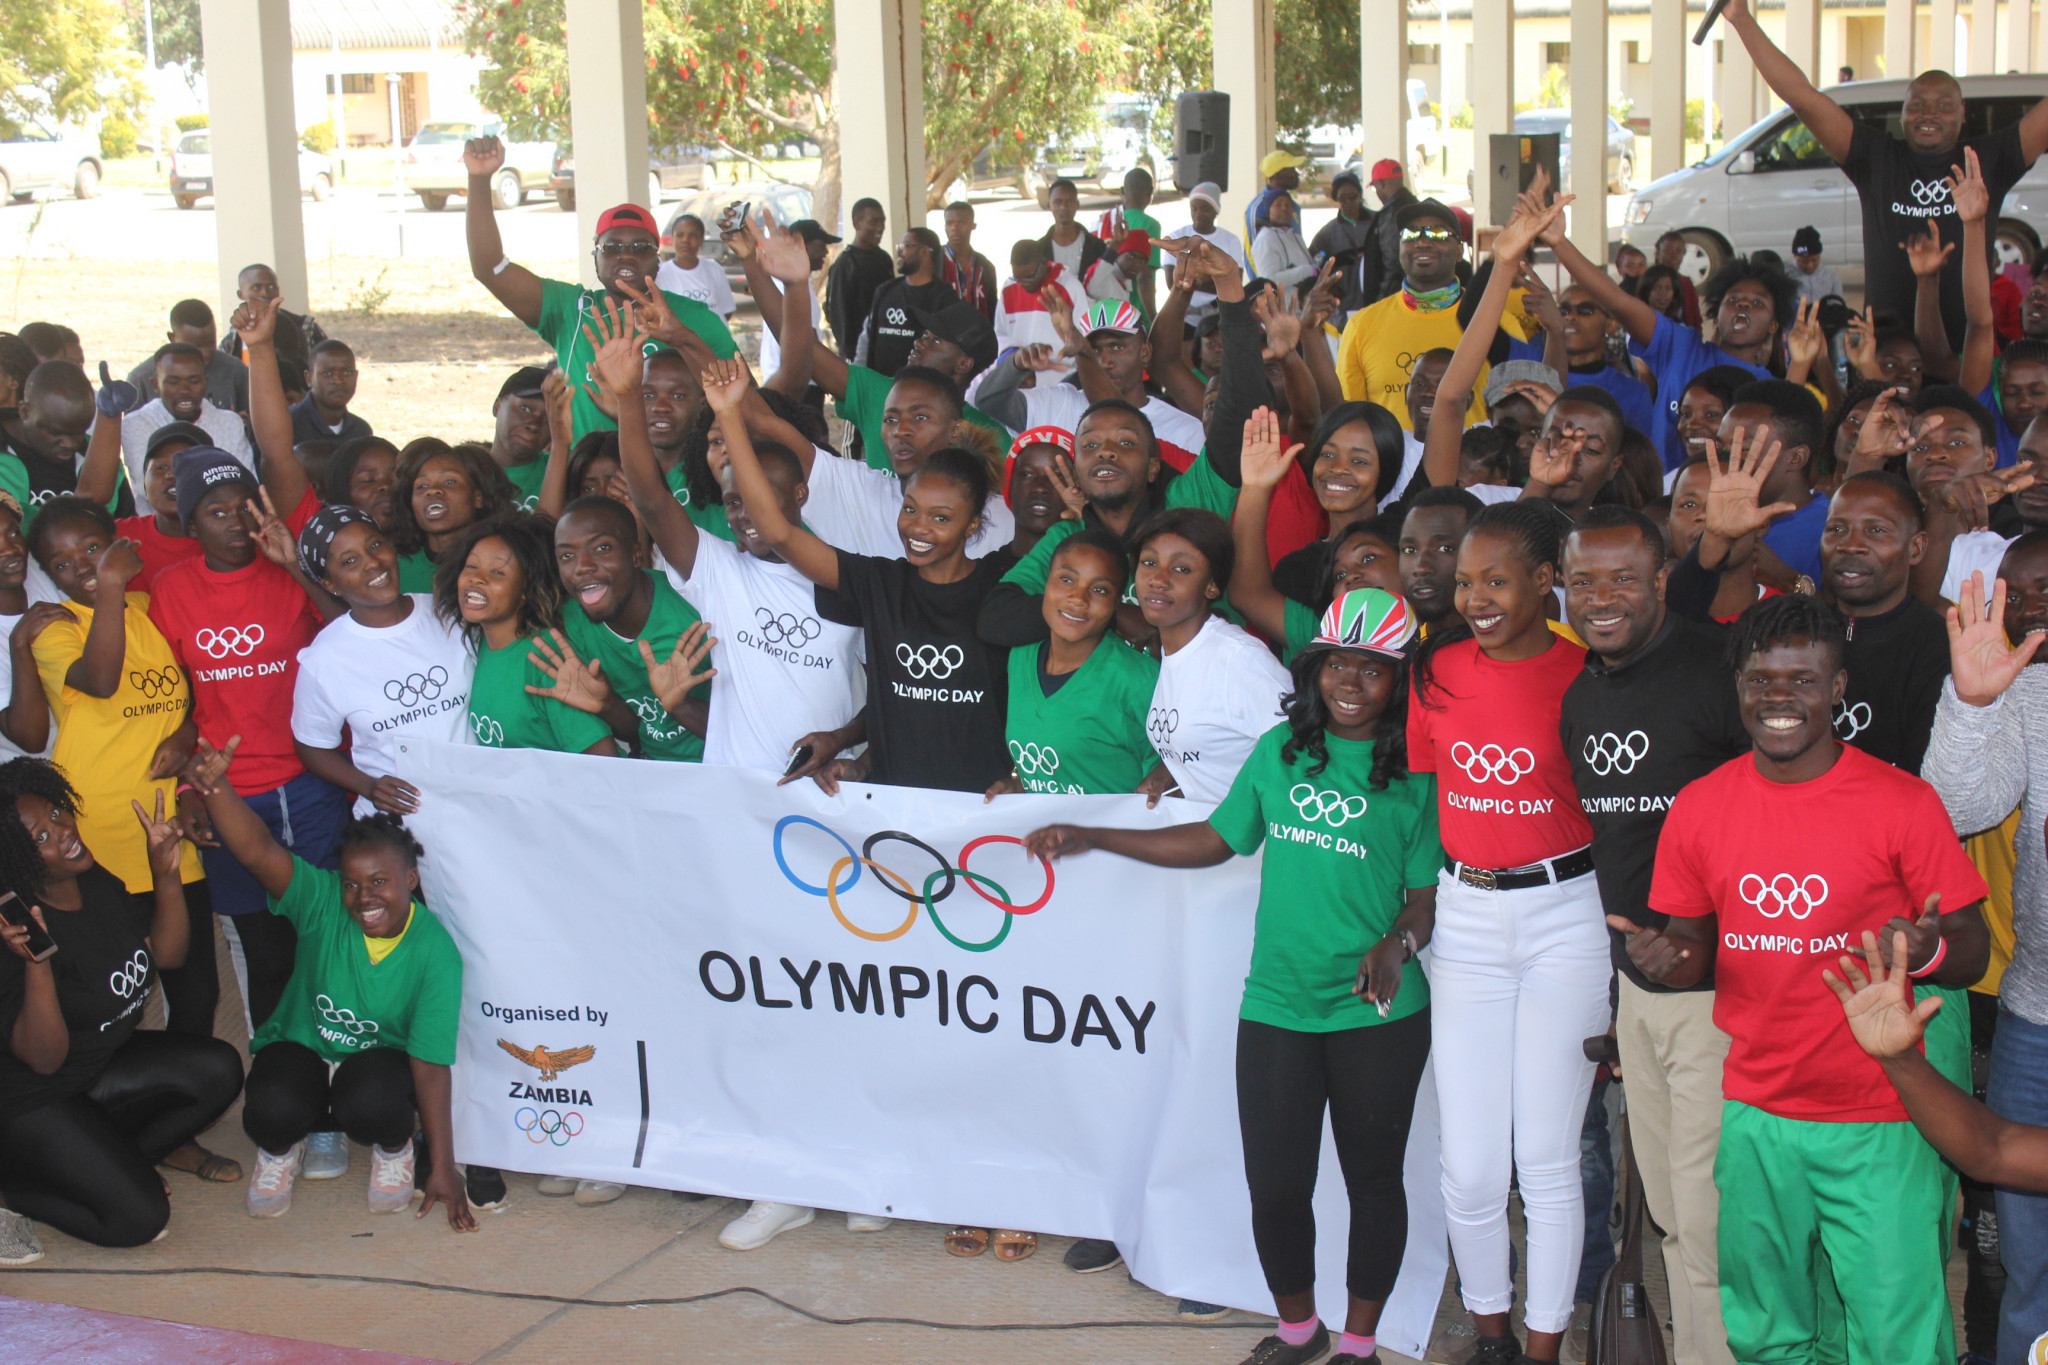 Activities in Kabwe in Central Province saw hundreds of people take part in an Olympc Day run, aerobics, hockey and judo events ©NCOZ